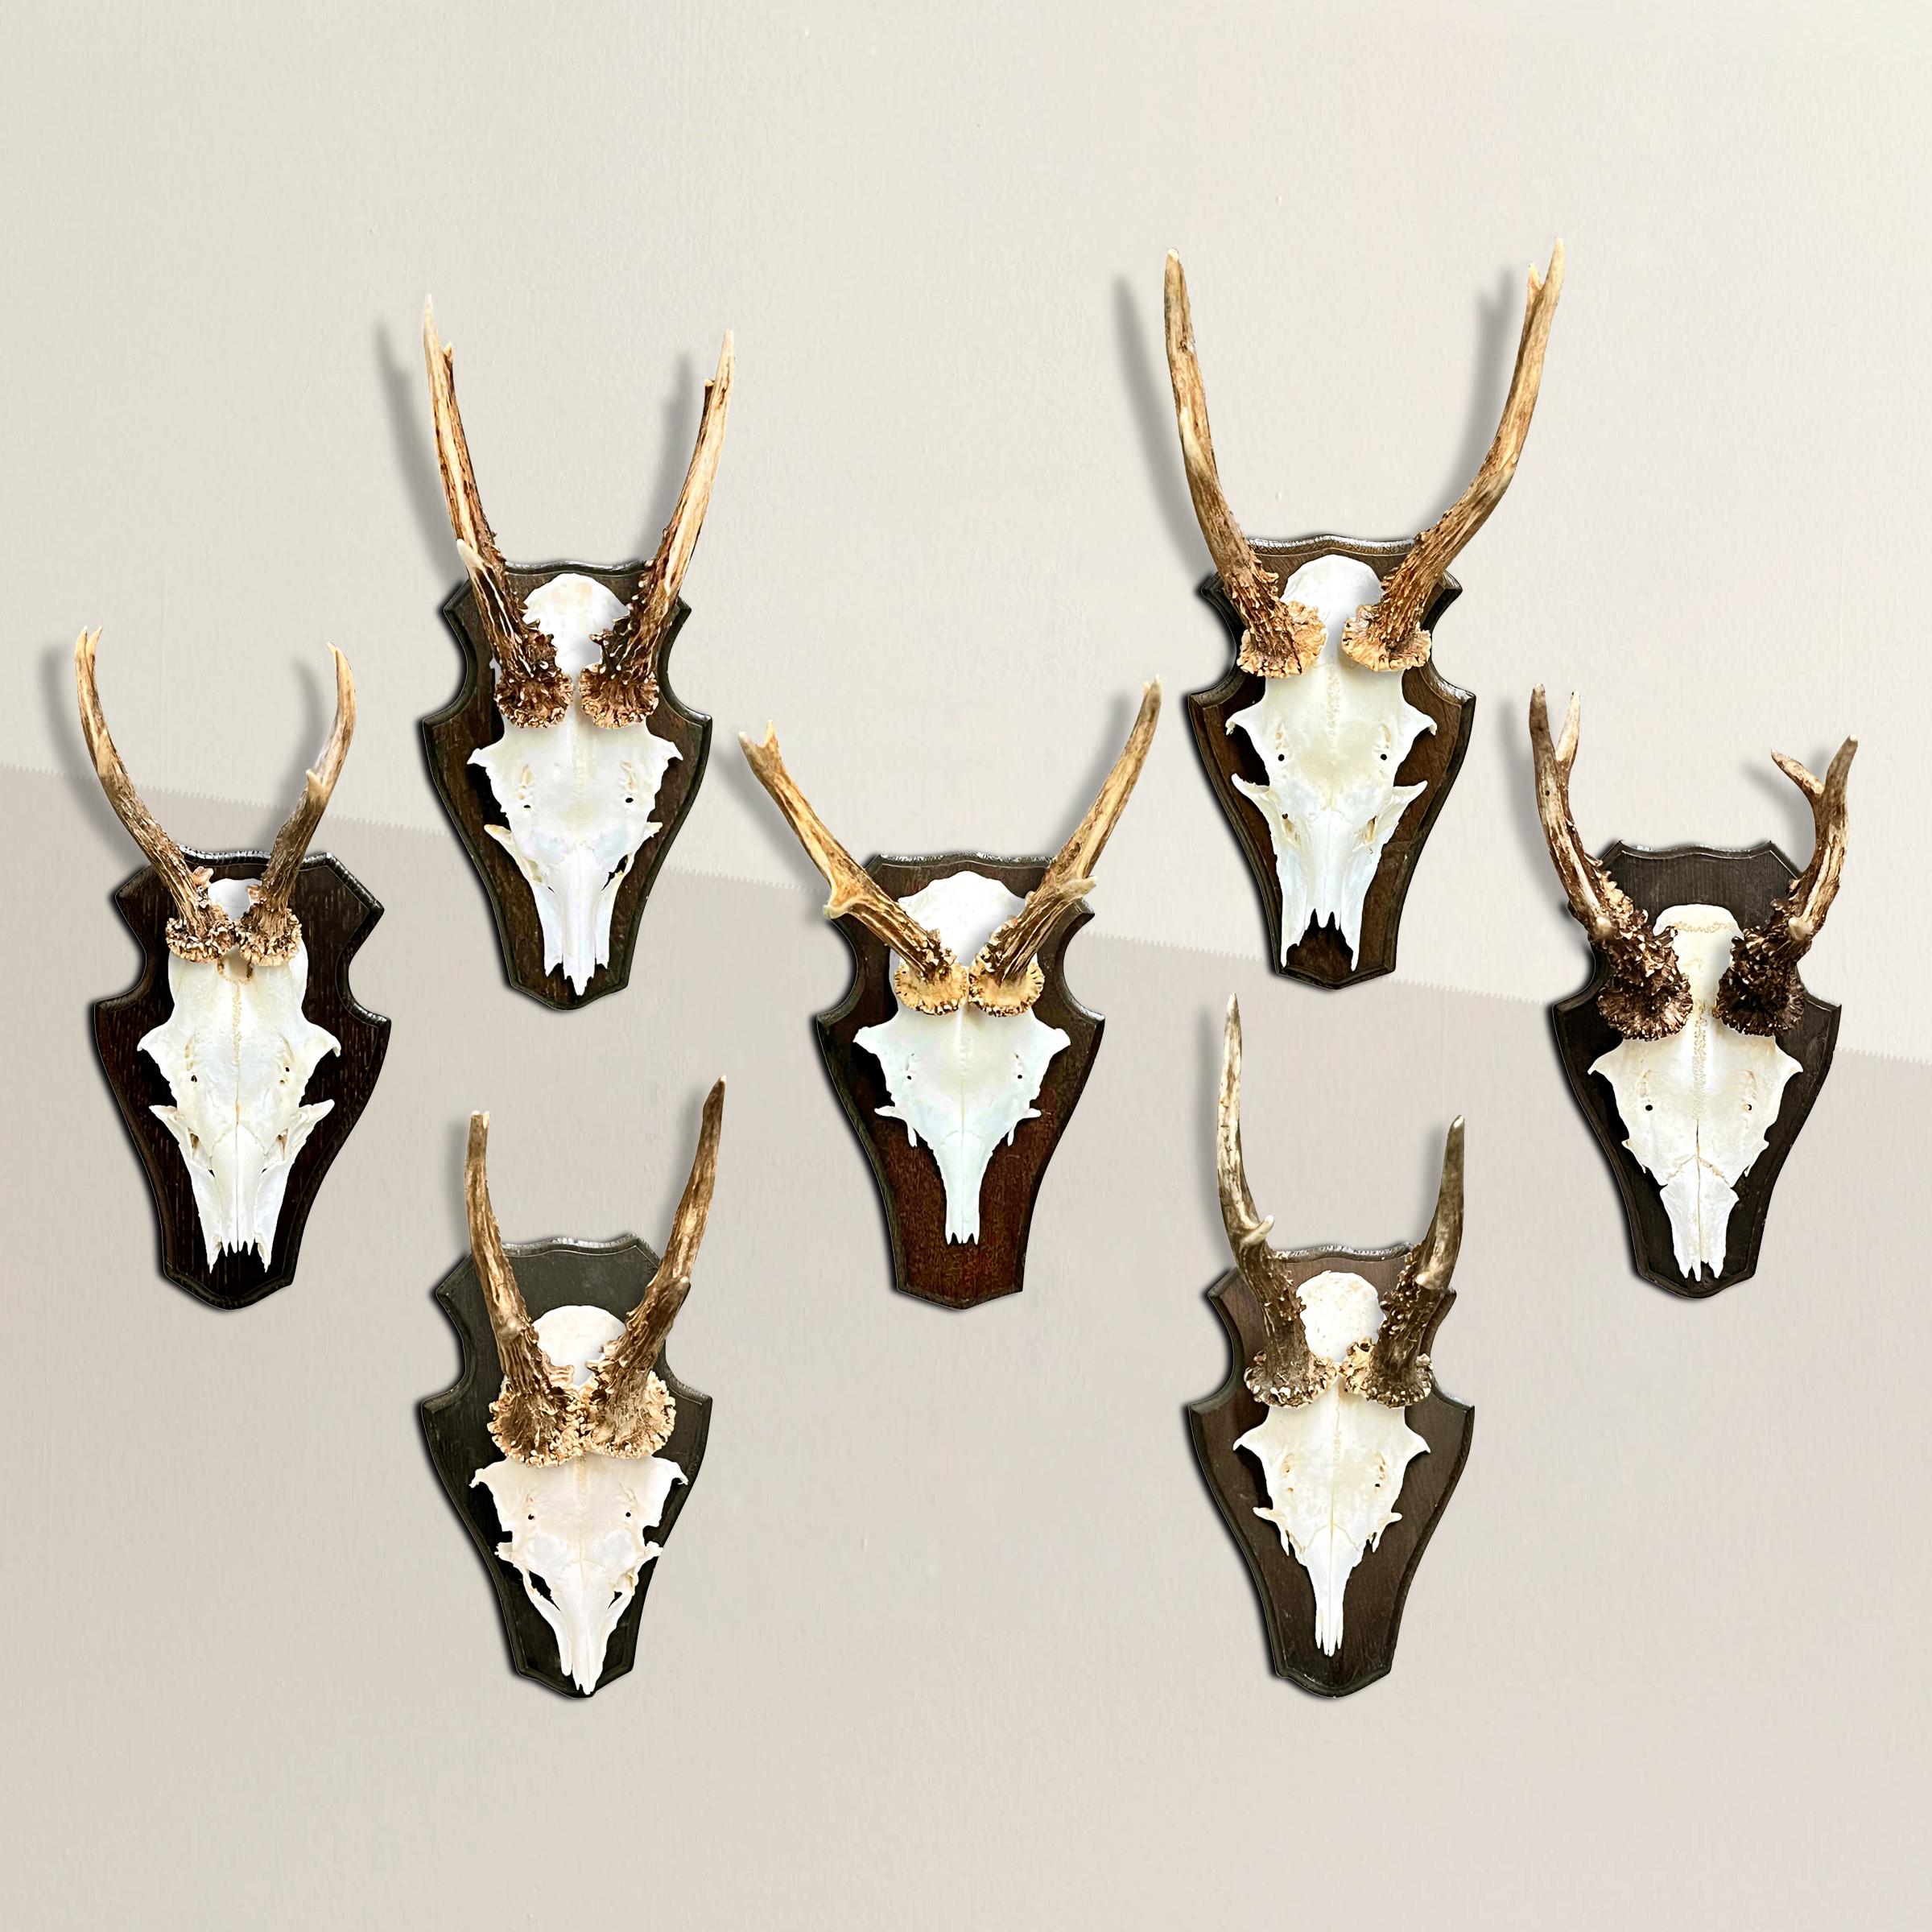 Immerse yourself in the regal history of hunting with this extraordinary collection of seven Roe deer trophy mounts from a venerable hunting lodge in the Black Forest, Germany. Each mount bears witness to a bygone era when the exclusive privilege of